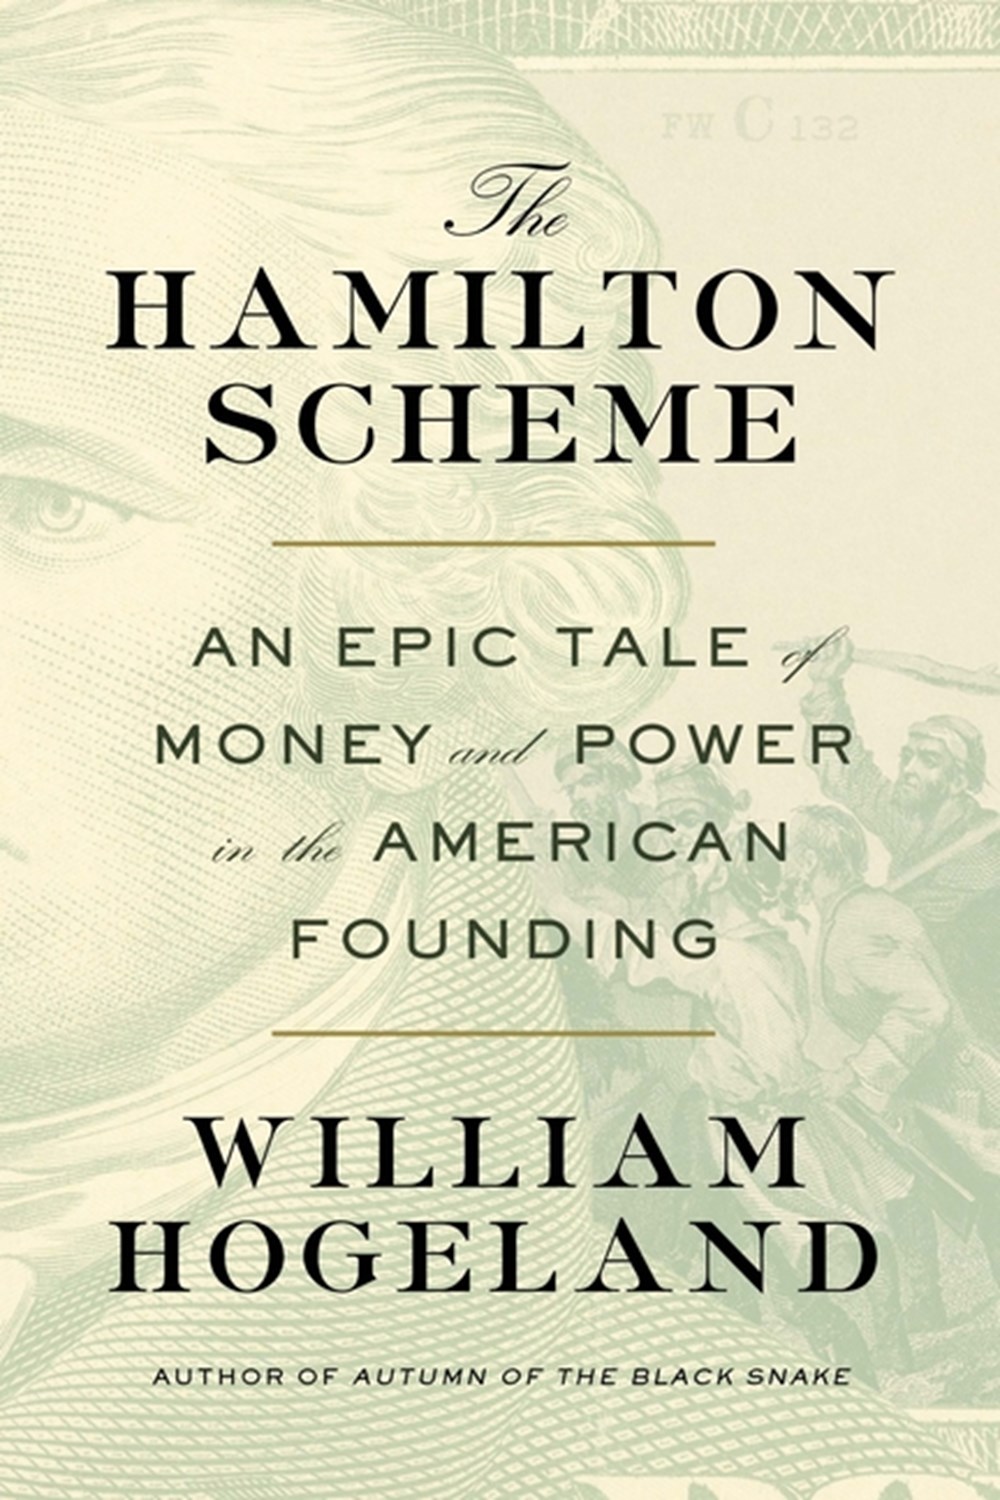 Hamilton Scheme: An Epic Tale of Money and Power in the American Founding